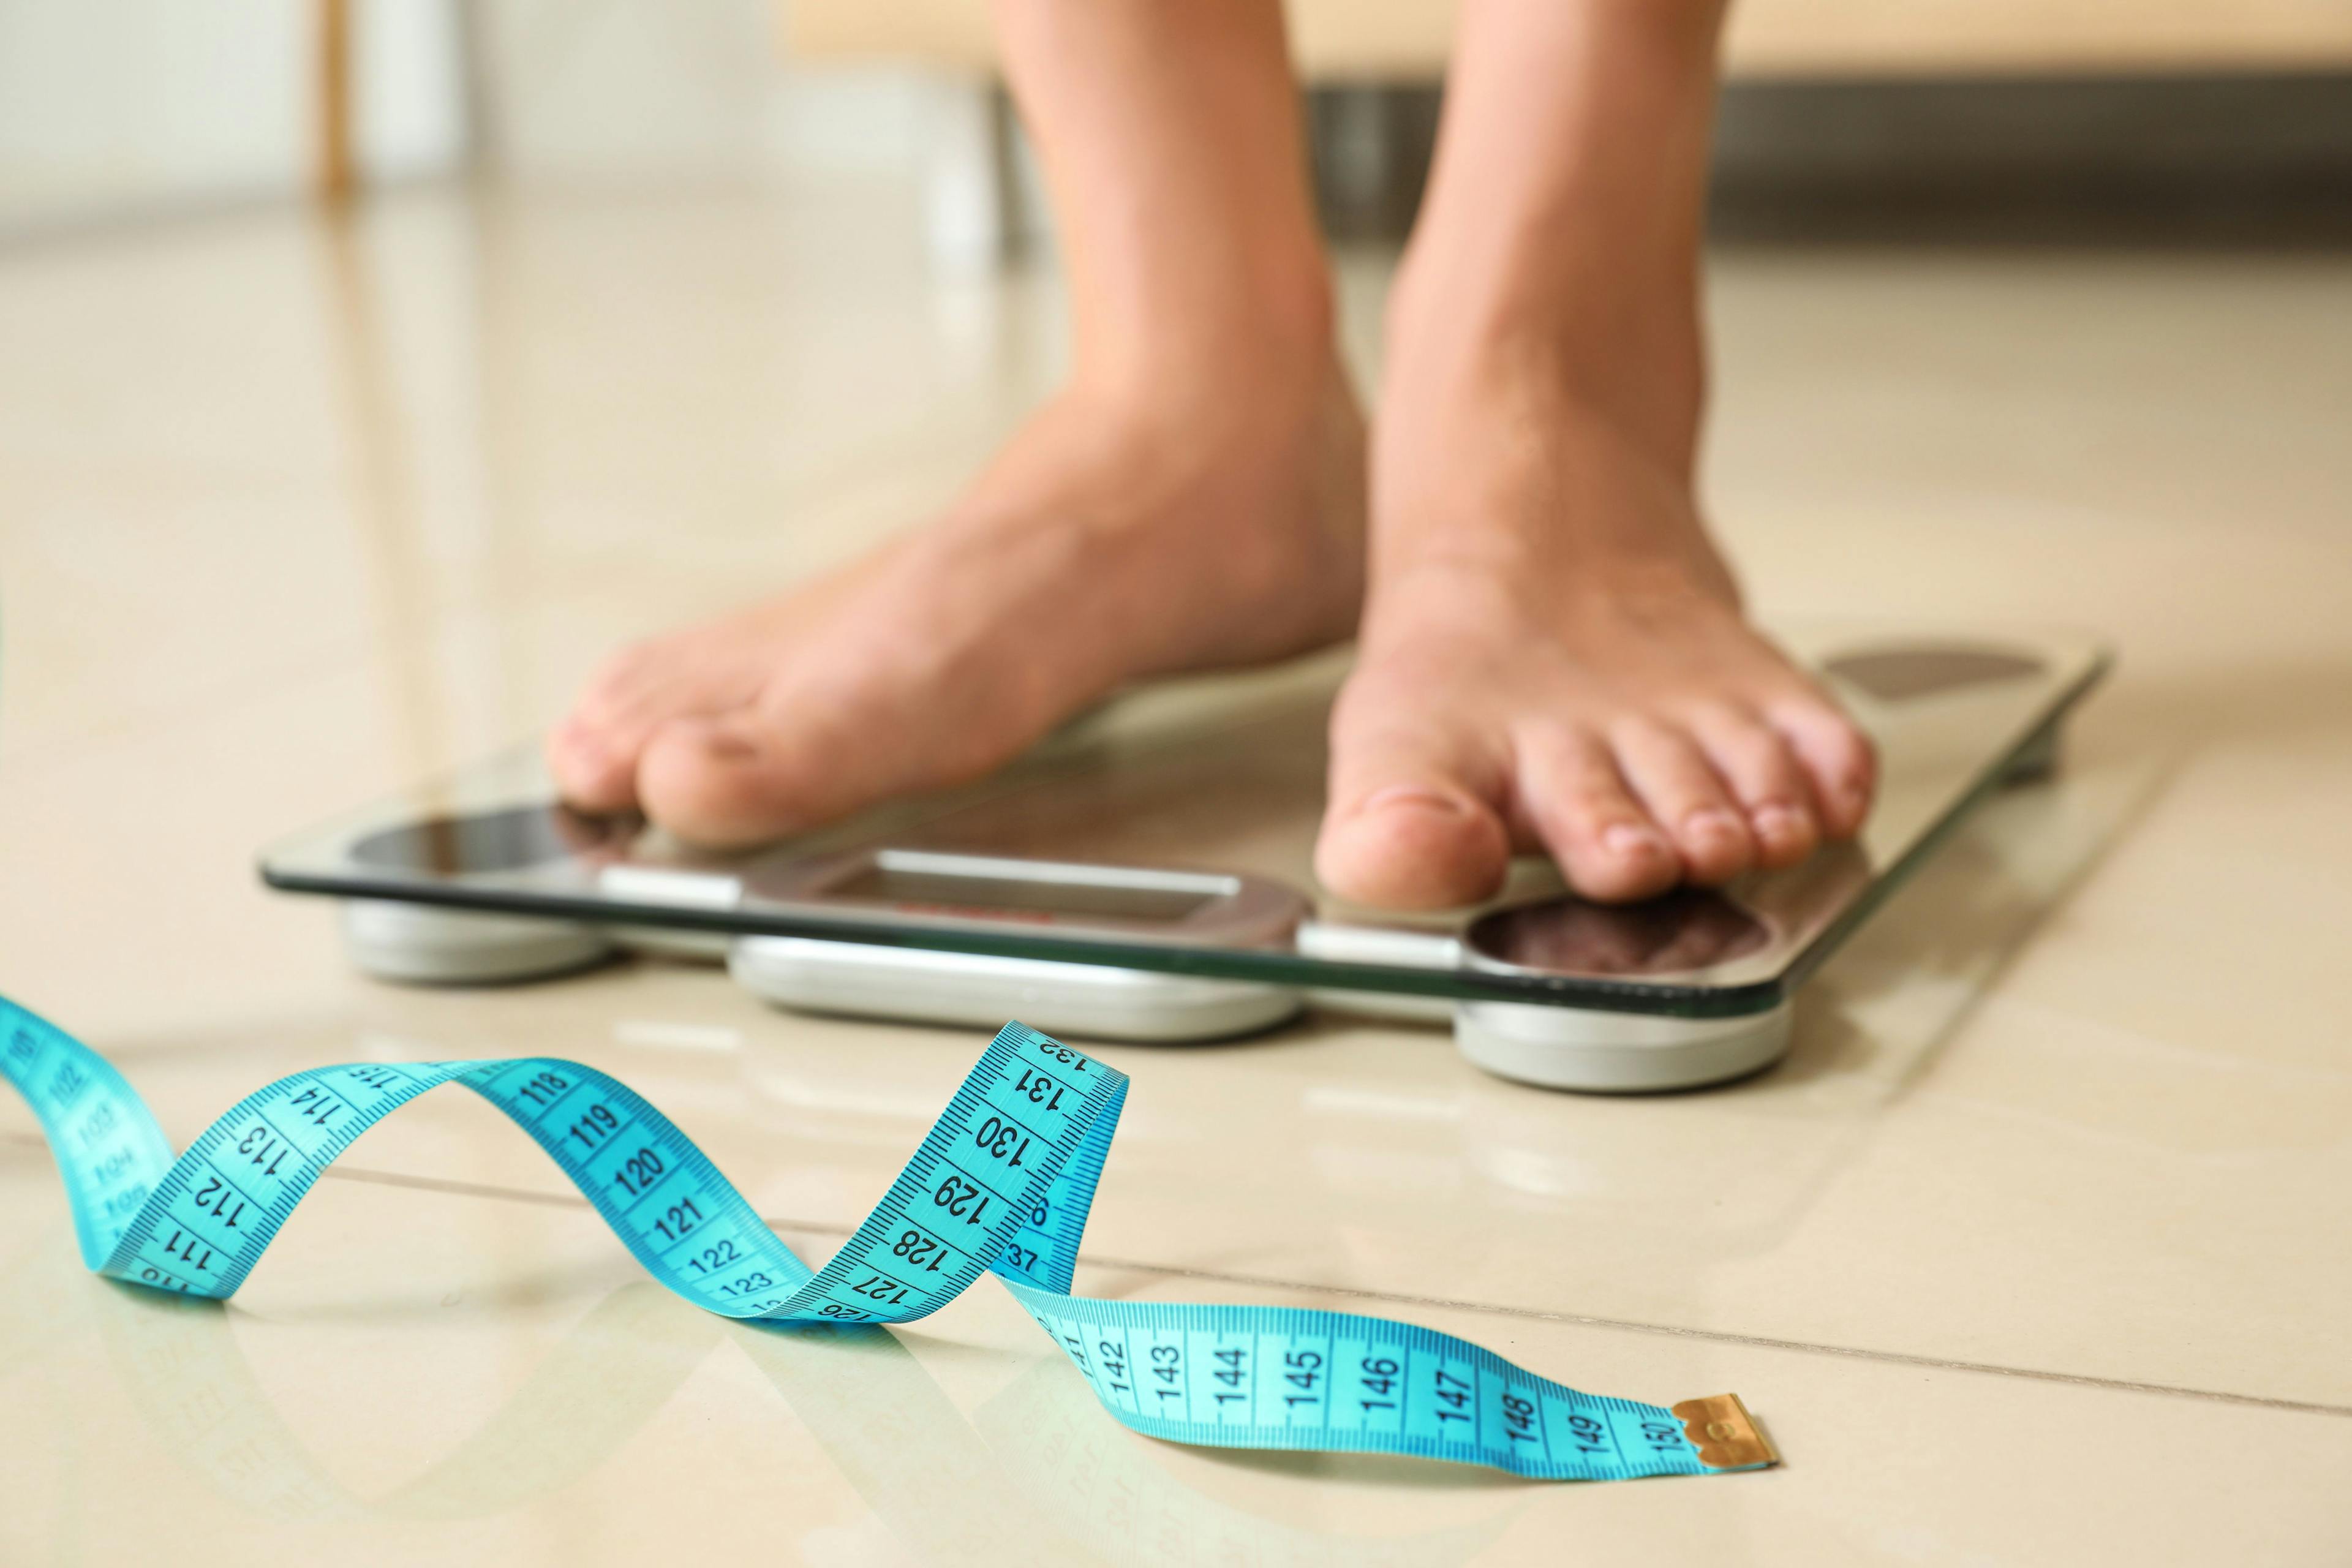 Tape in front of woman standing on floor scales indoors. Obesity | Image Credit: New Africa - stock.adobe.com